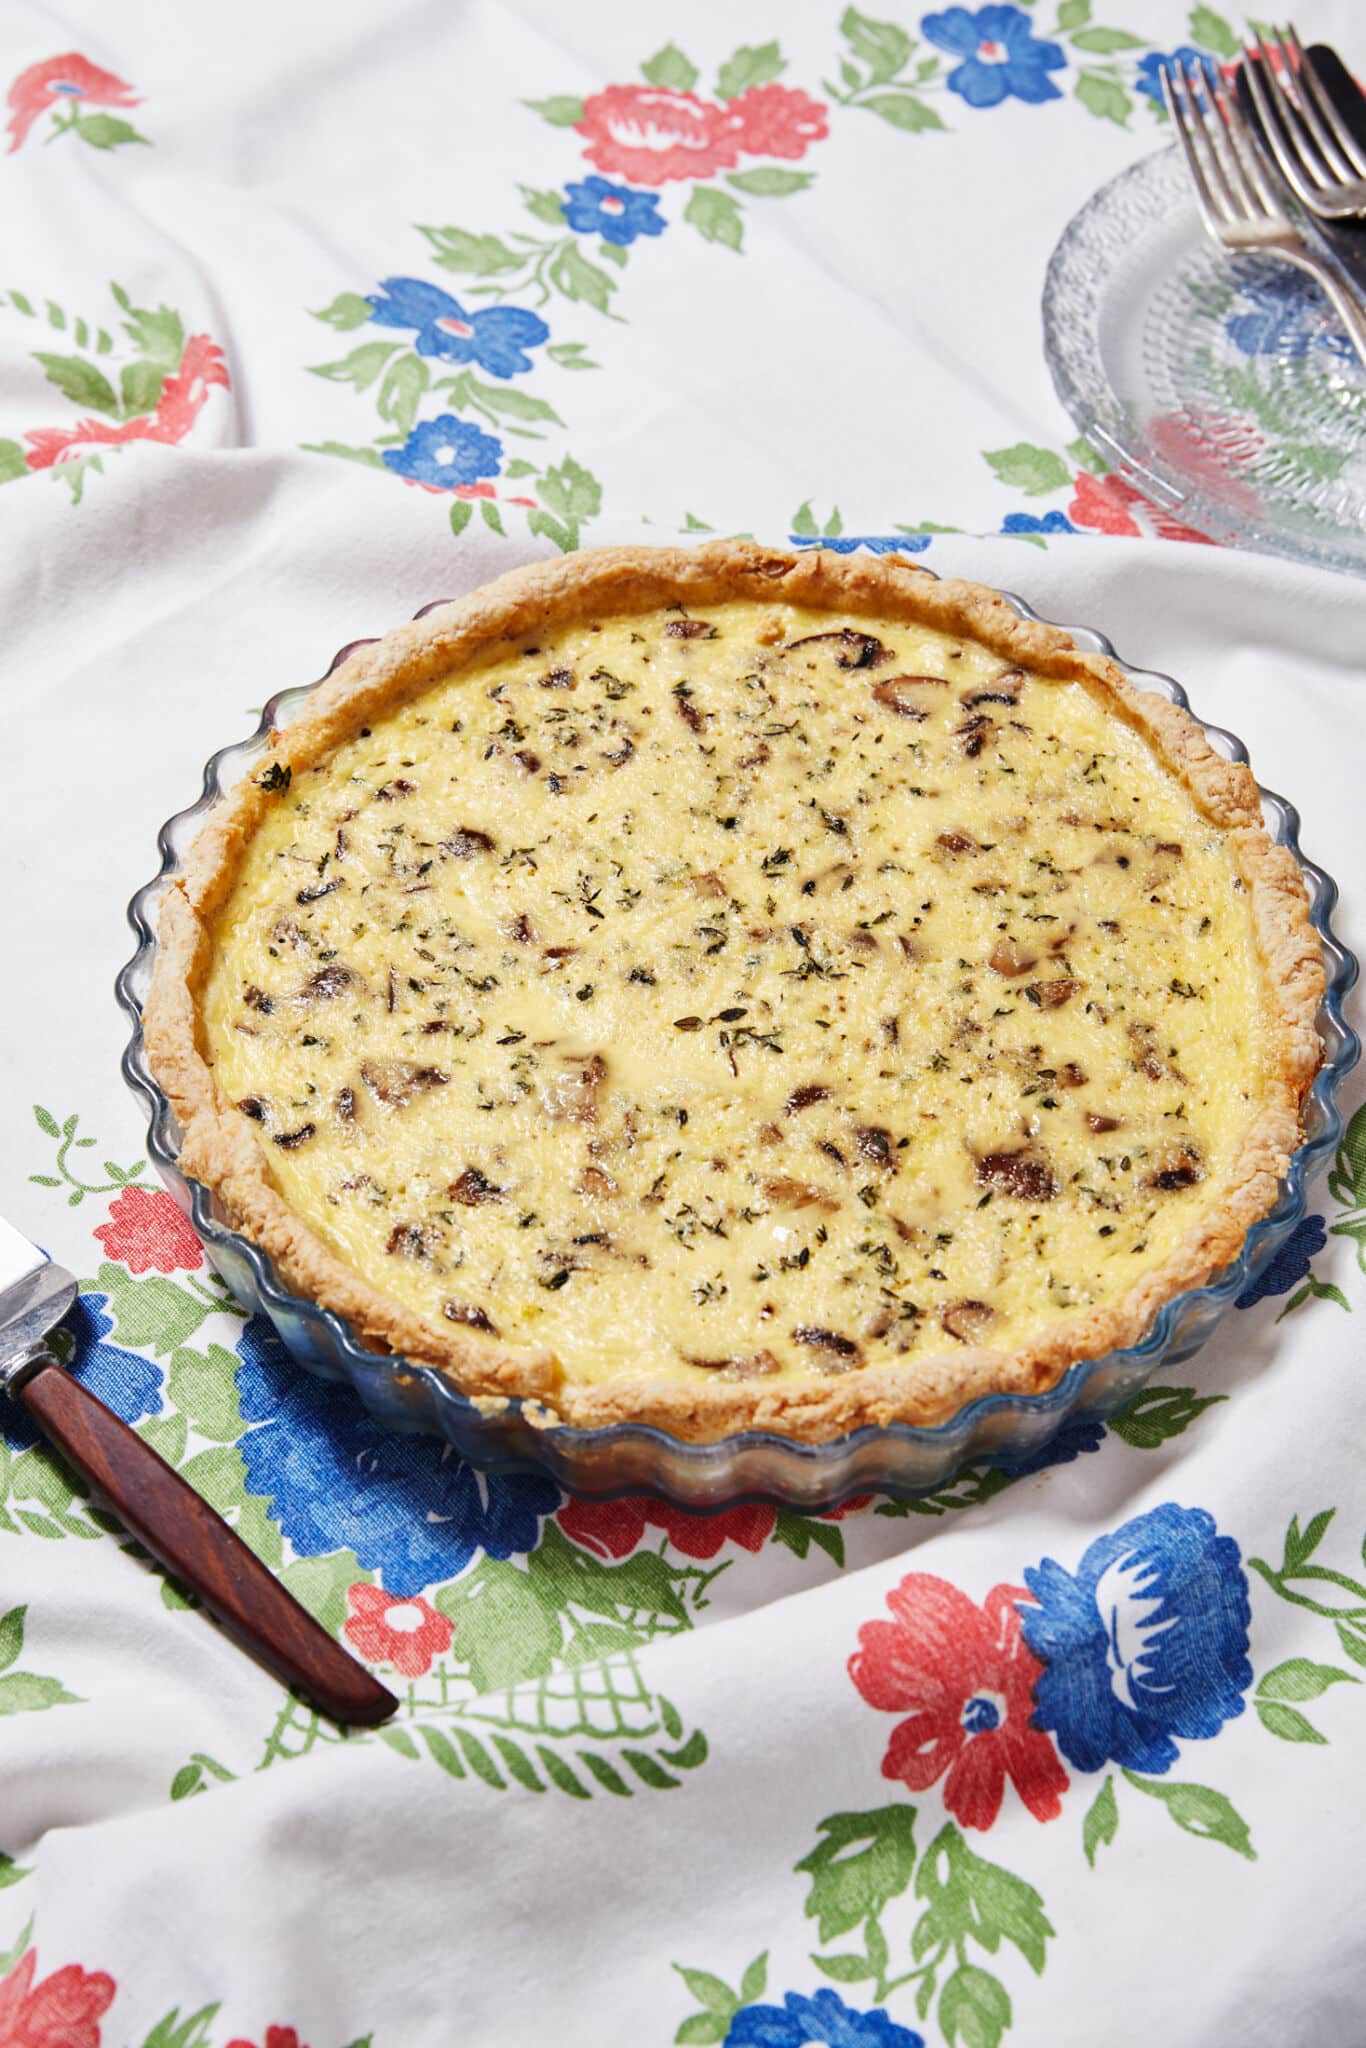 The whole Mushroom and Thyme Leaf Tart is baked in a glass tart dish, with golden, buttery and crumbly crust loaded with velvety custard filling and mushrooms. A tart server, small plate and forks are on the side.